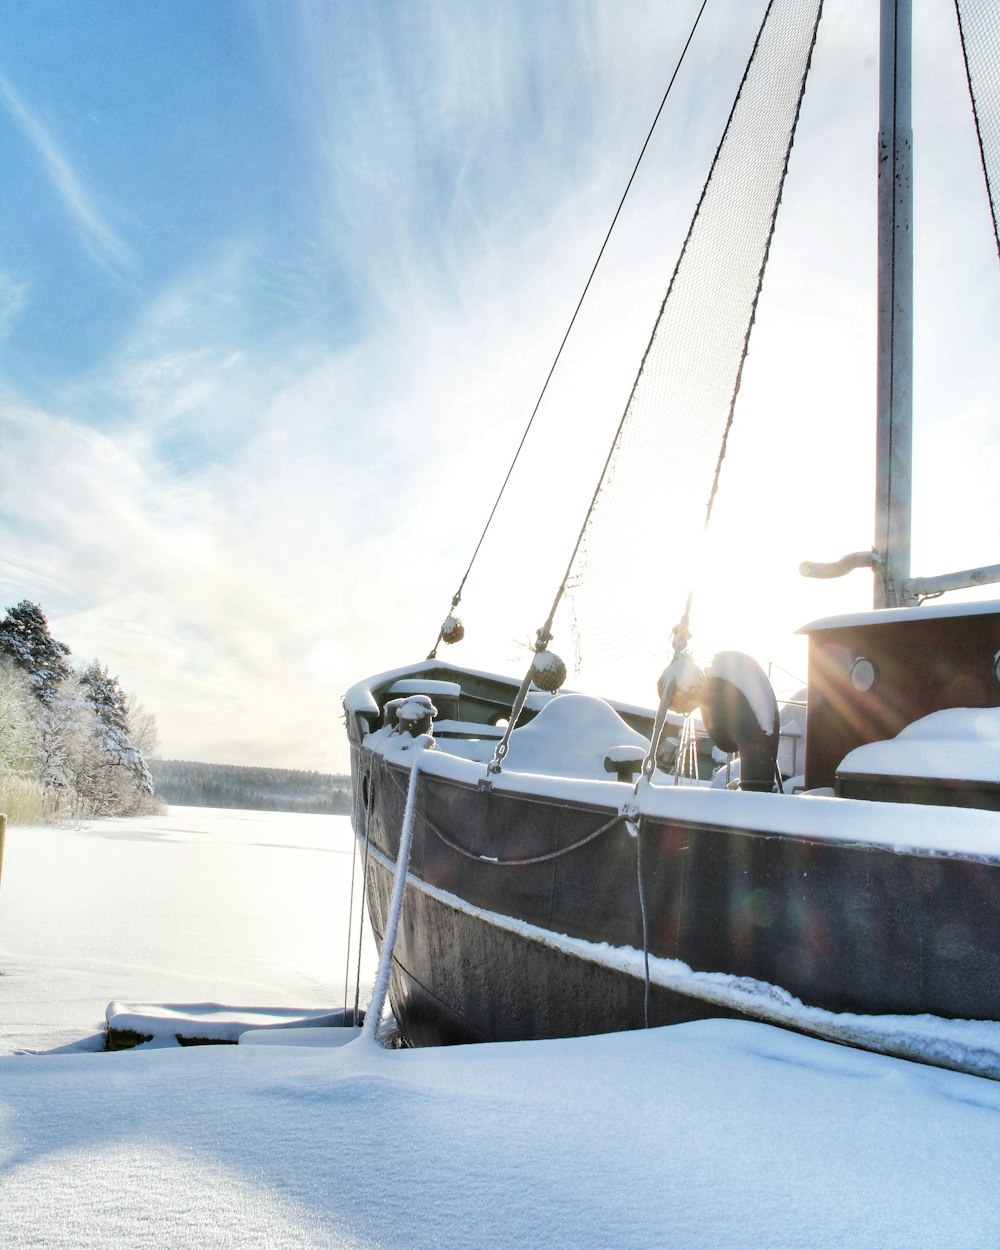 white and brown boat on snow covered ground during daytime